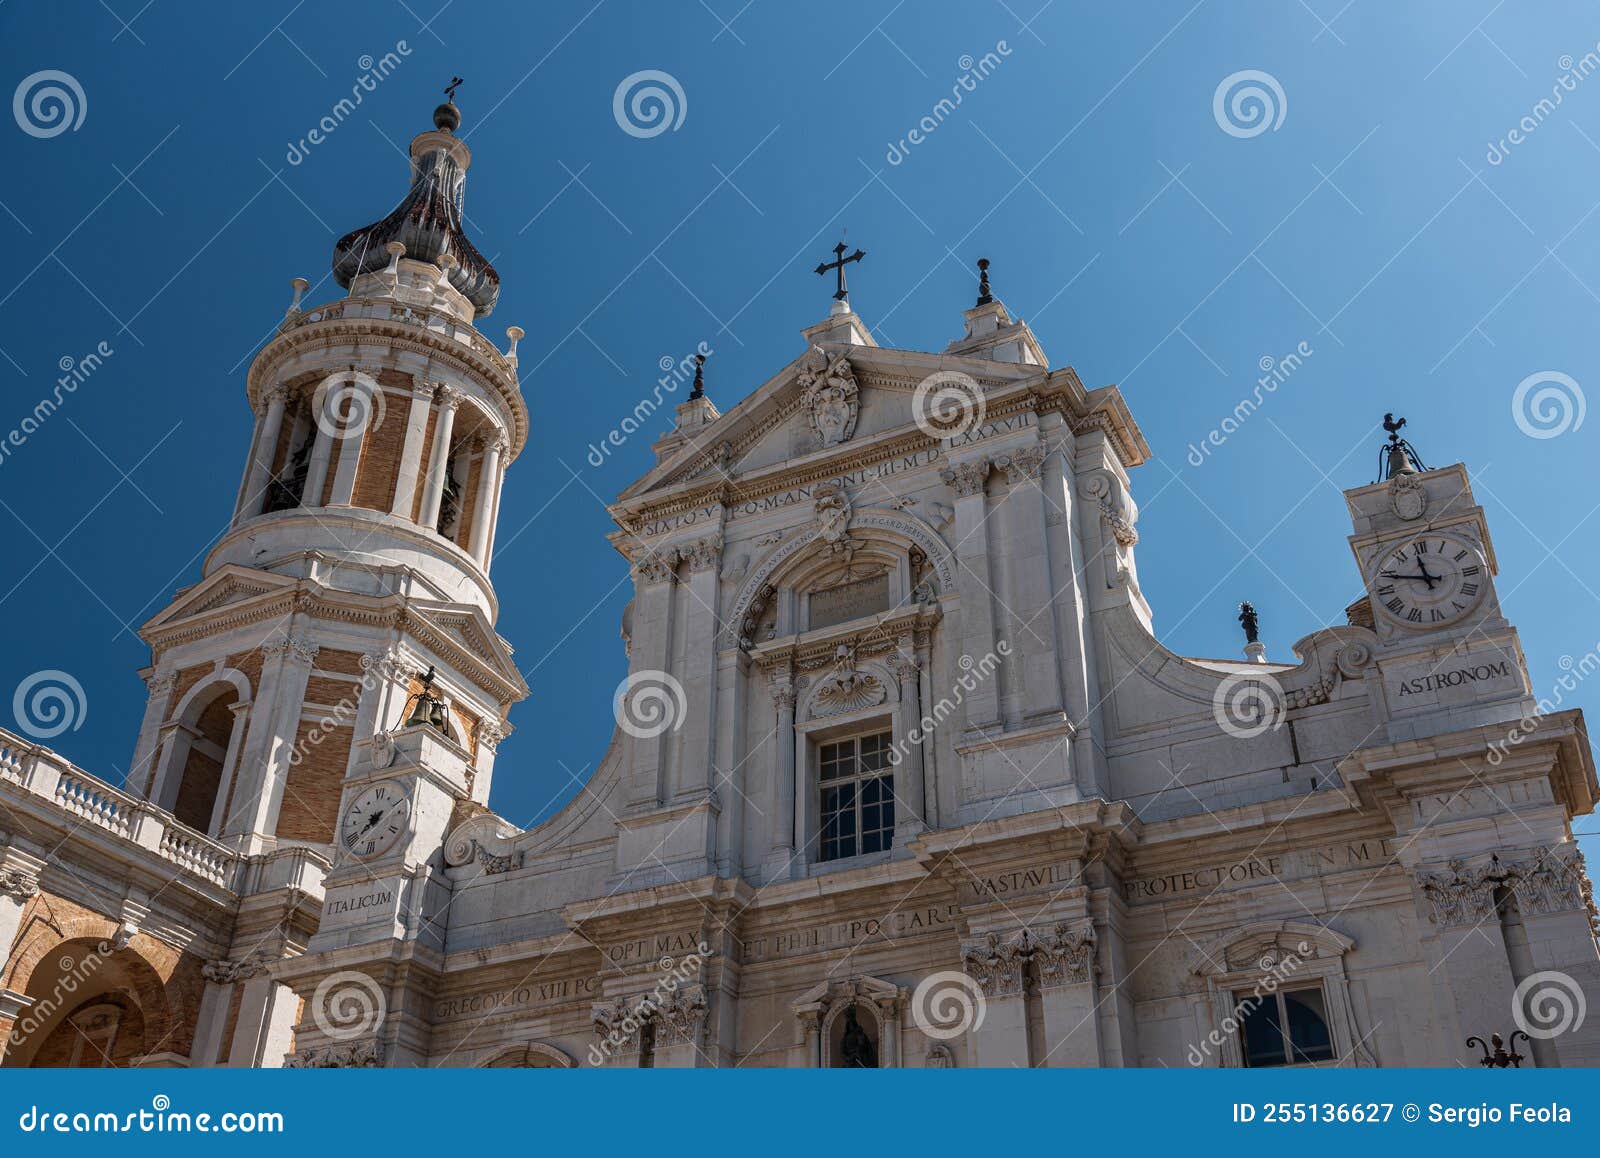 Loreto Marche Italy The Basilica Of The Holy House Stock Image